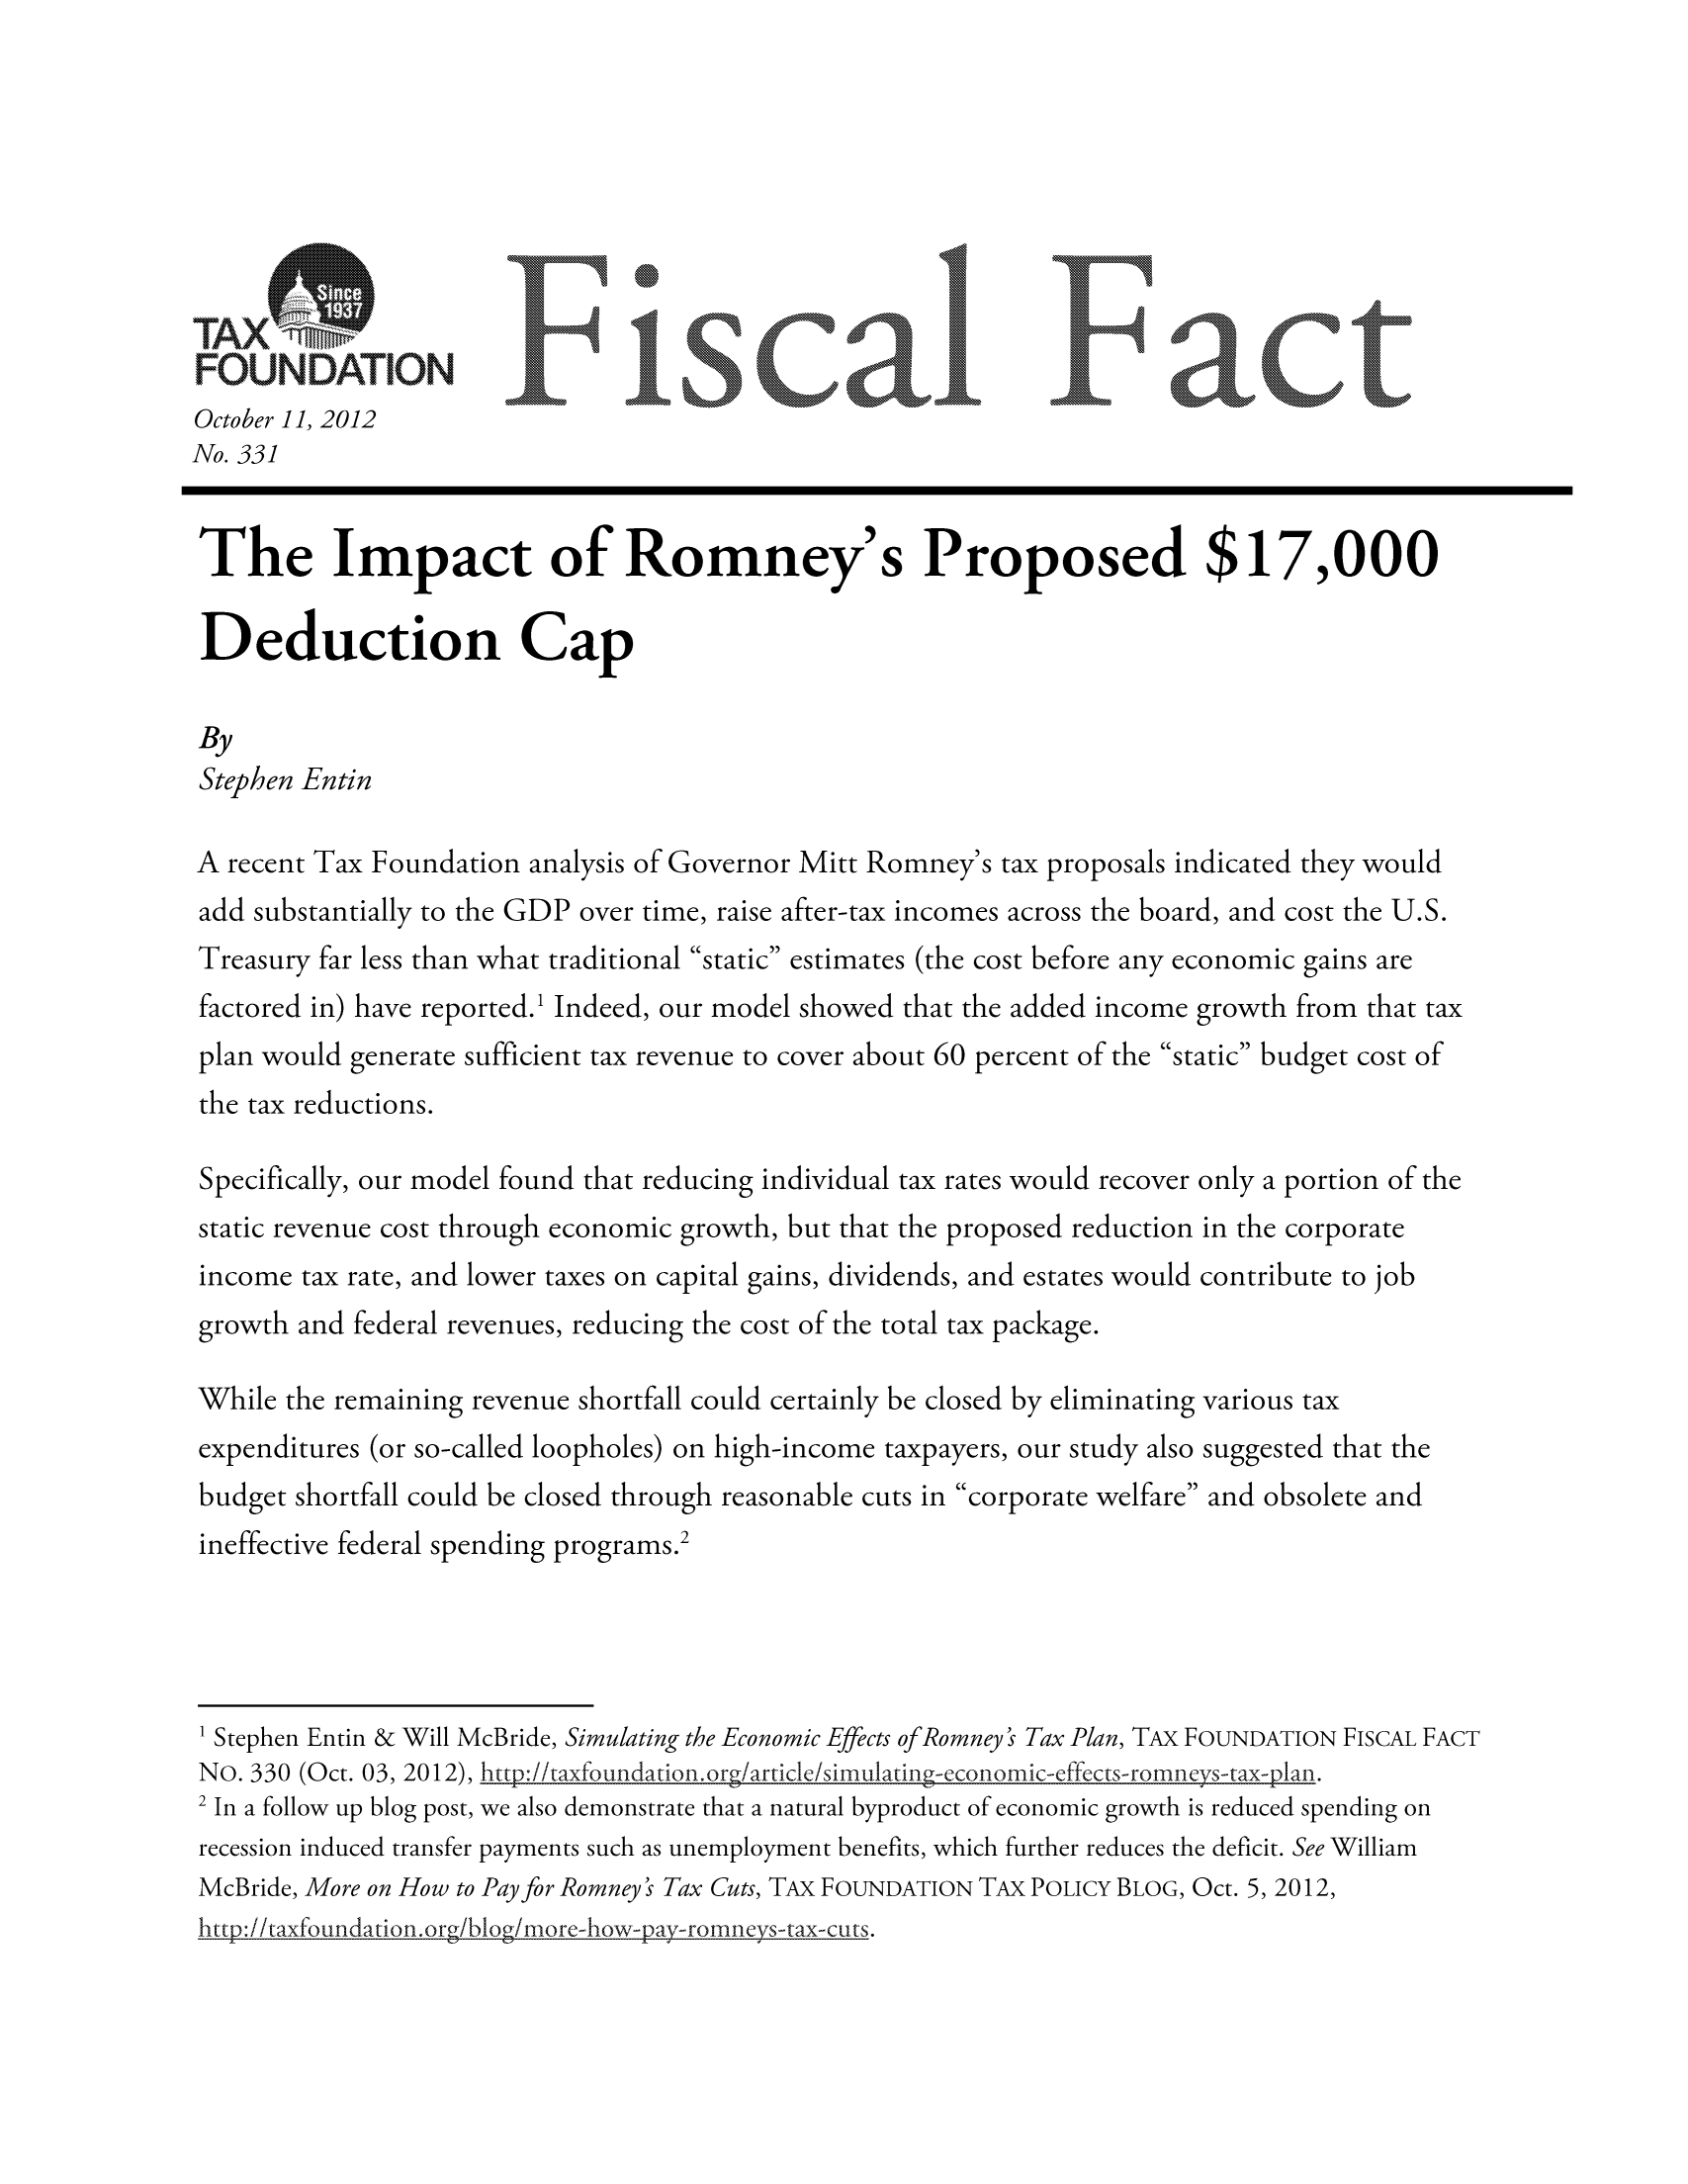 handle is hein.taxfoundation/ffddbxz0001 and id is 1 raw text is: October 11, 2012
No. 331
The Impact of Romney's Proposed $17,000
Deduction Cap
By
Stephen Entin
A recent Tax Foundation analysis of Governor Mitt Romney's tax proposals indicated they would
add substantially to the GDP over time, raise after-tax incomes across the board, and cost the U.S.
Treasury far less than what traditional static estimates (the cost before any economic gains are
factored in) have reported.1 Indeed, our model showed that the added income growth from that tax
plan would generate sufficient tax revenue to cover about 60 percent of the static budget cost of
the tax reductions.
Specifically, our model found that reducing individual tax rates would recover only a portion of the
static revenue cost through economic growth, but that the proposed reduction in the corporate
income tax rate, and lower taxes on capital gains, dividends, and estates would contribute to job
growth and federal revenues, reducing the cost of the total tax package.
While the remaining revenue shortfall could certainly be closed by eliminating various tax
expenditures (or so-called loopholes) on high-income taxpayers, our study also suggested that the
budget shortfall could be closed through reasonable cuts in corporate welfare and obsolete and
ineffective federal spending programs.2
1Stephen Entin & Will McBride, Simulating the Economic Effects of Romney's Tax Plan, TAX FOUNDATION FISCAL FACT
NO. 330 (Oct. 03, 2012), :ttp//taxfoundation. org/articke/simnulatng econmmic -effcts-romneys-ta-7an.
2 In a follow up blog post, we also demonstrate that a natural byproduct of economic growth is reduced spending on
recession induced transfer payments such as unemployment benefits, which further reduces the deficit. See William
McBride, More on How to Pay for Romney's Tax Cuts, TAX FOUNDATION TAX POLICY BLOG, Oct. 5, 2012,
http:/ikaxfoundationorg/blog/mnore-how-pay-romneys-tax-cuts.


